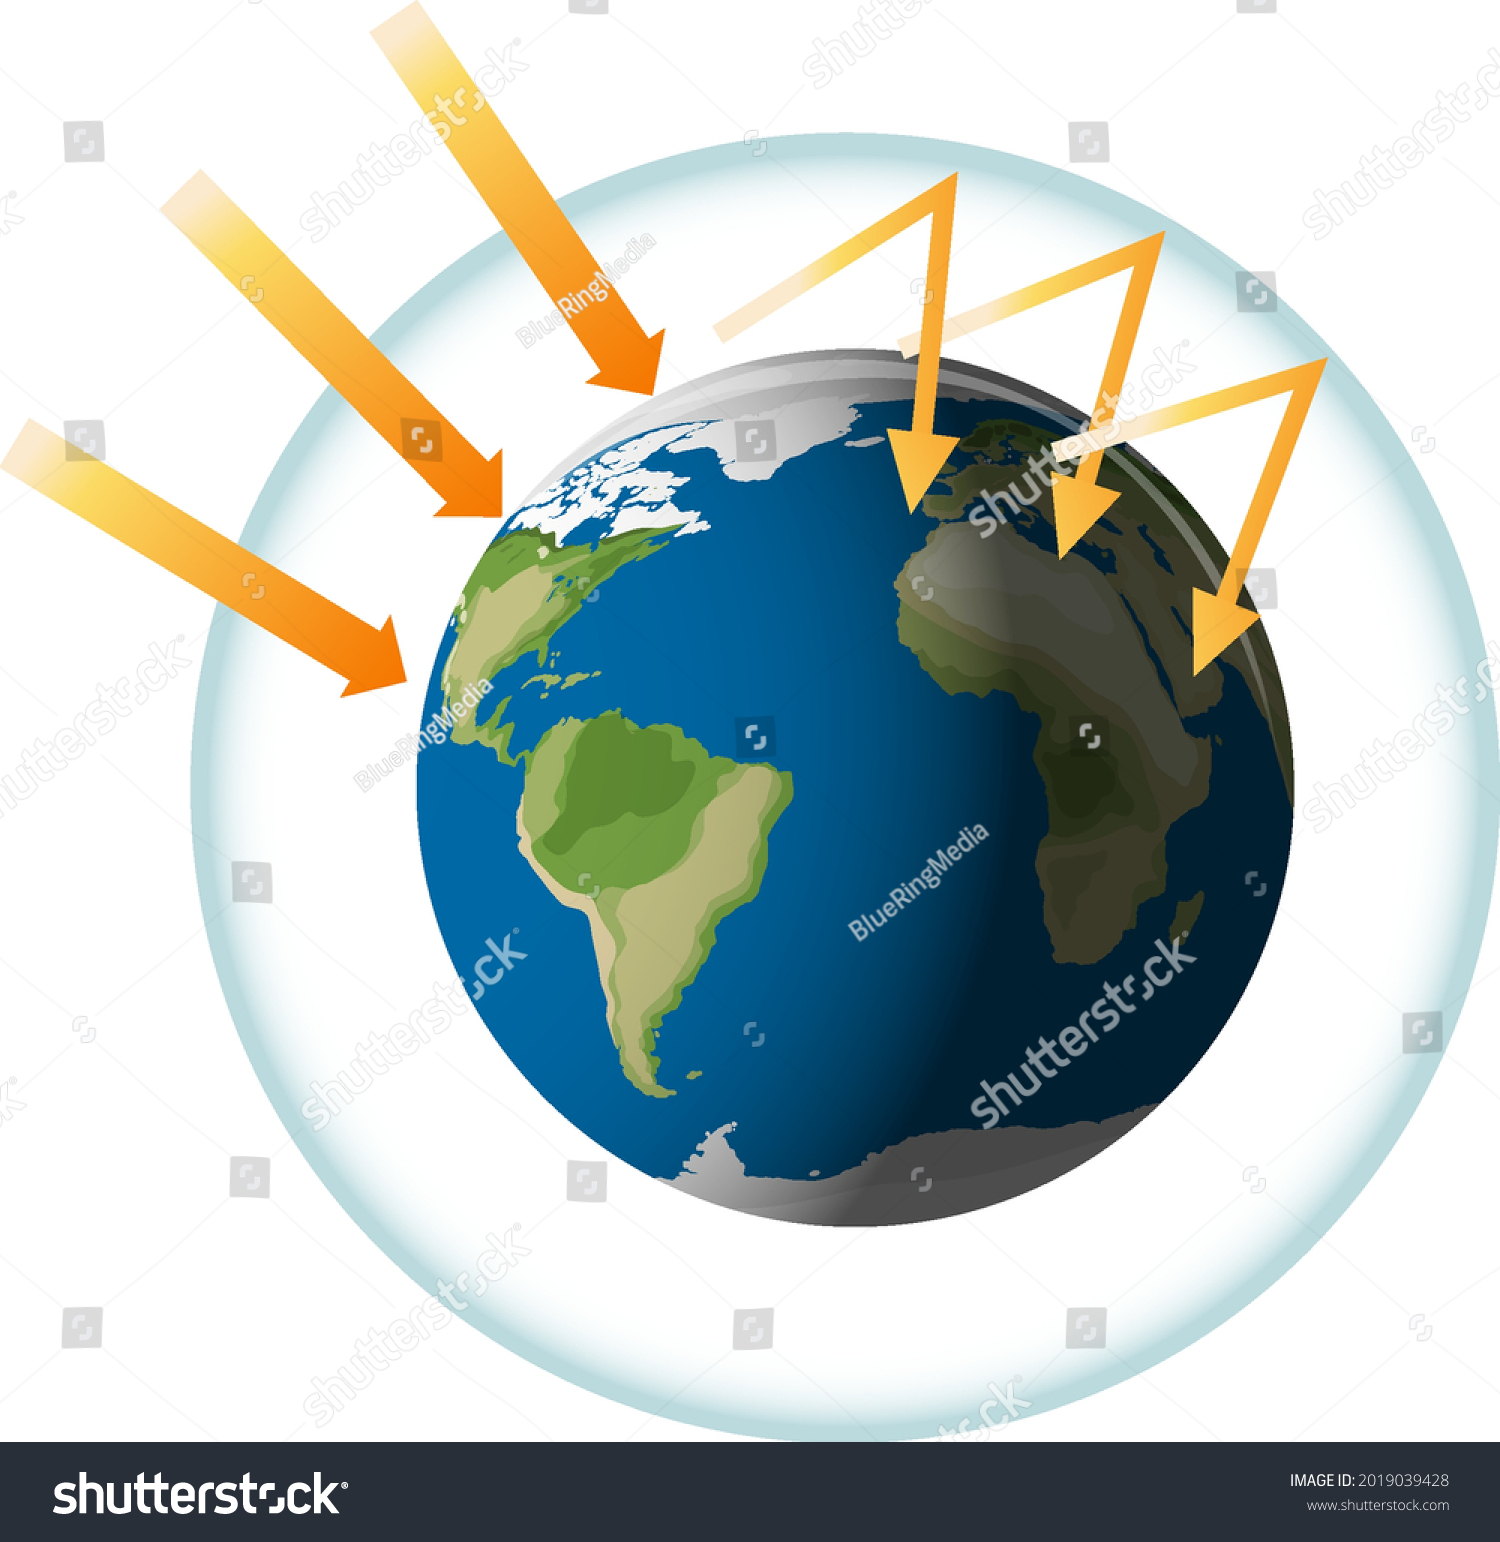 4,407 Planet earth greenhouse effect Images, Stock Photos & Vectors ...